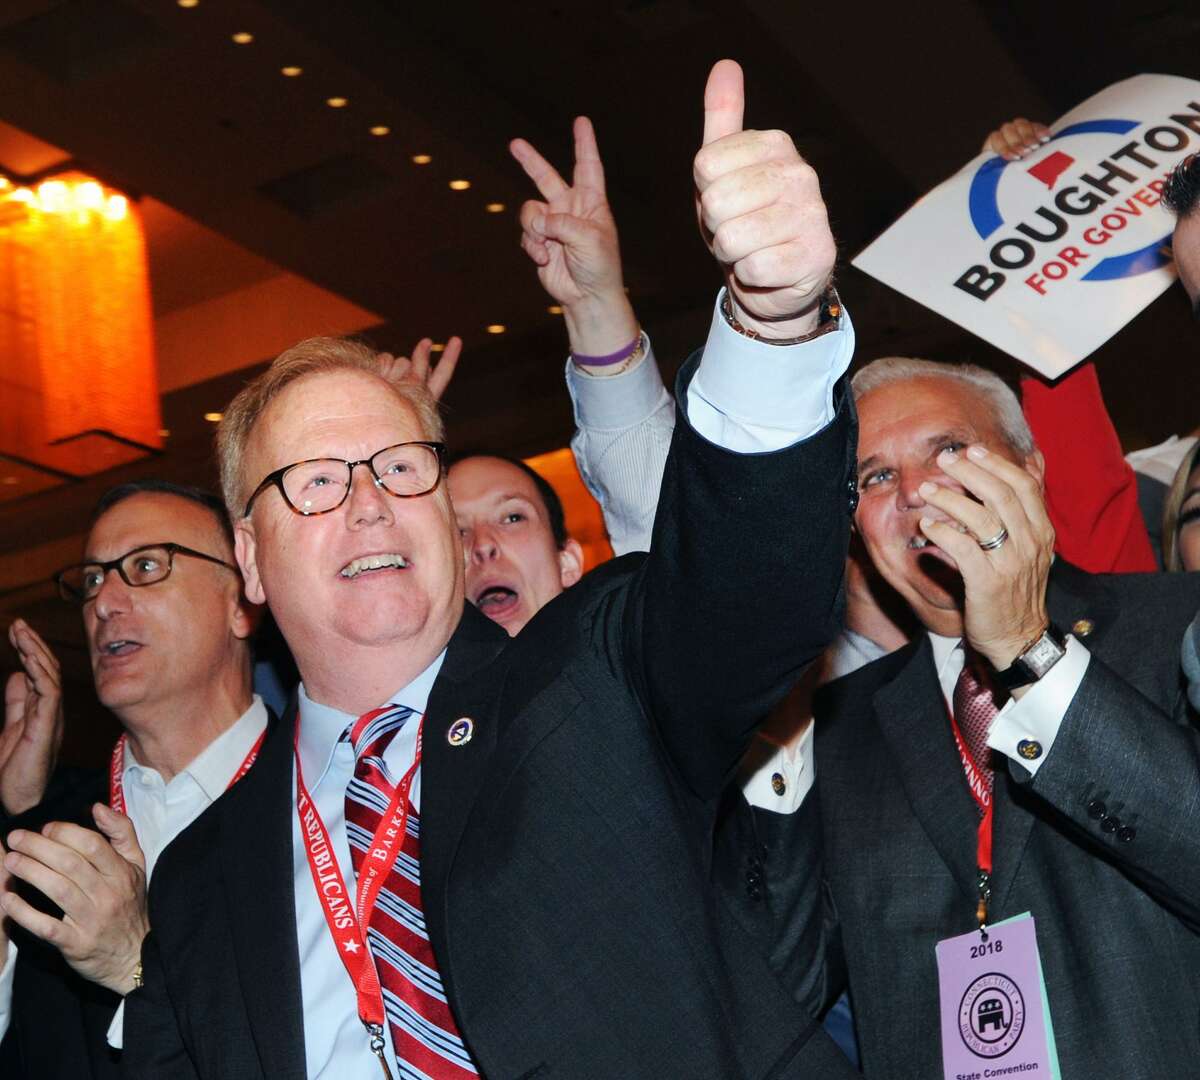 Danbury Mayor Mark Boughton, center, reacts after surpassing 50% of the delegate votes, enough needed to win the unofficial nomination as the Republican candidate for Governor during the Republican State Convention at Foxwoods Casino, Mashantucket, Conn., Saturday, May 12, 2018.